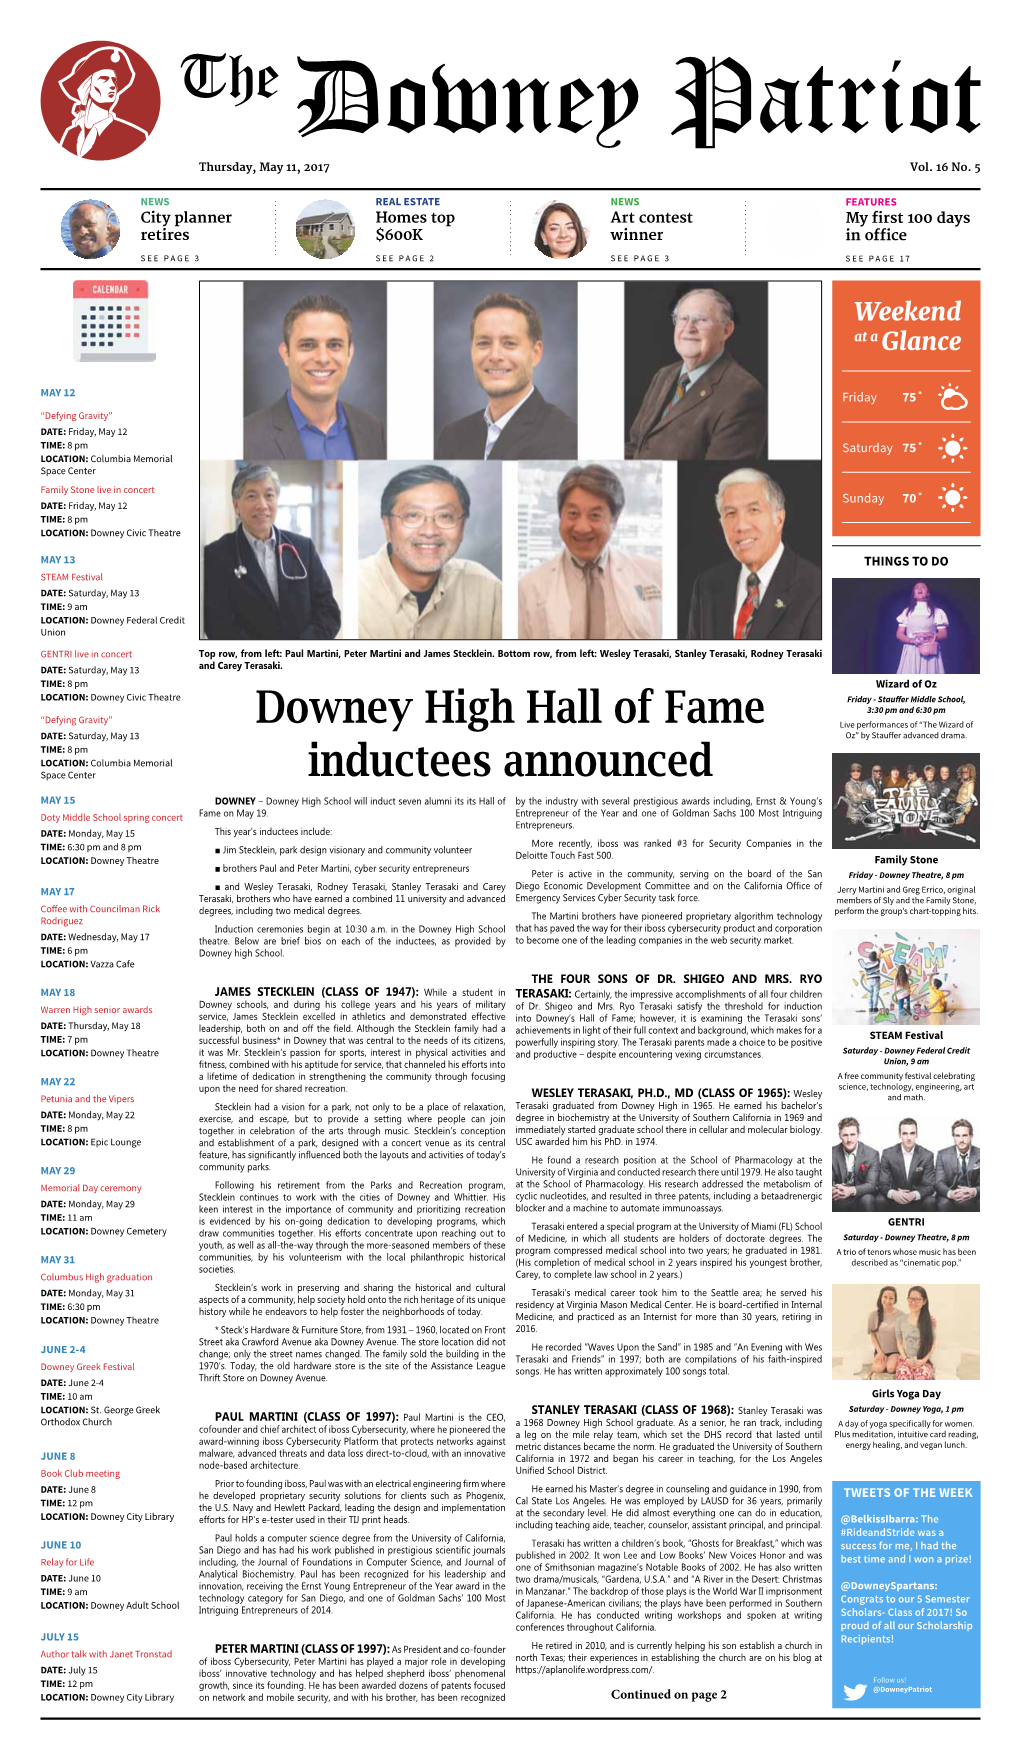 Downey High Hall of Fame Inductees Announced